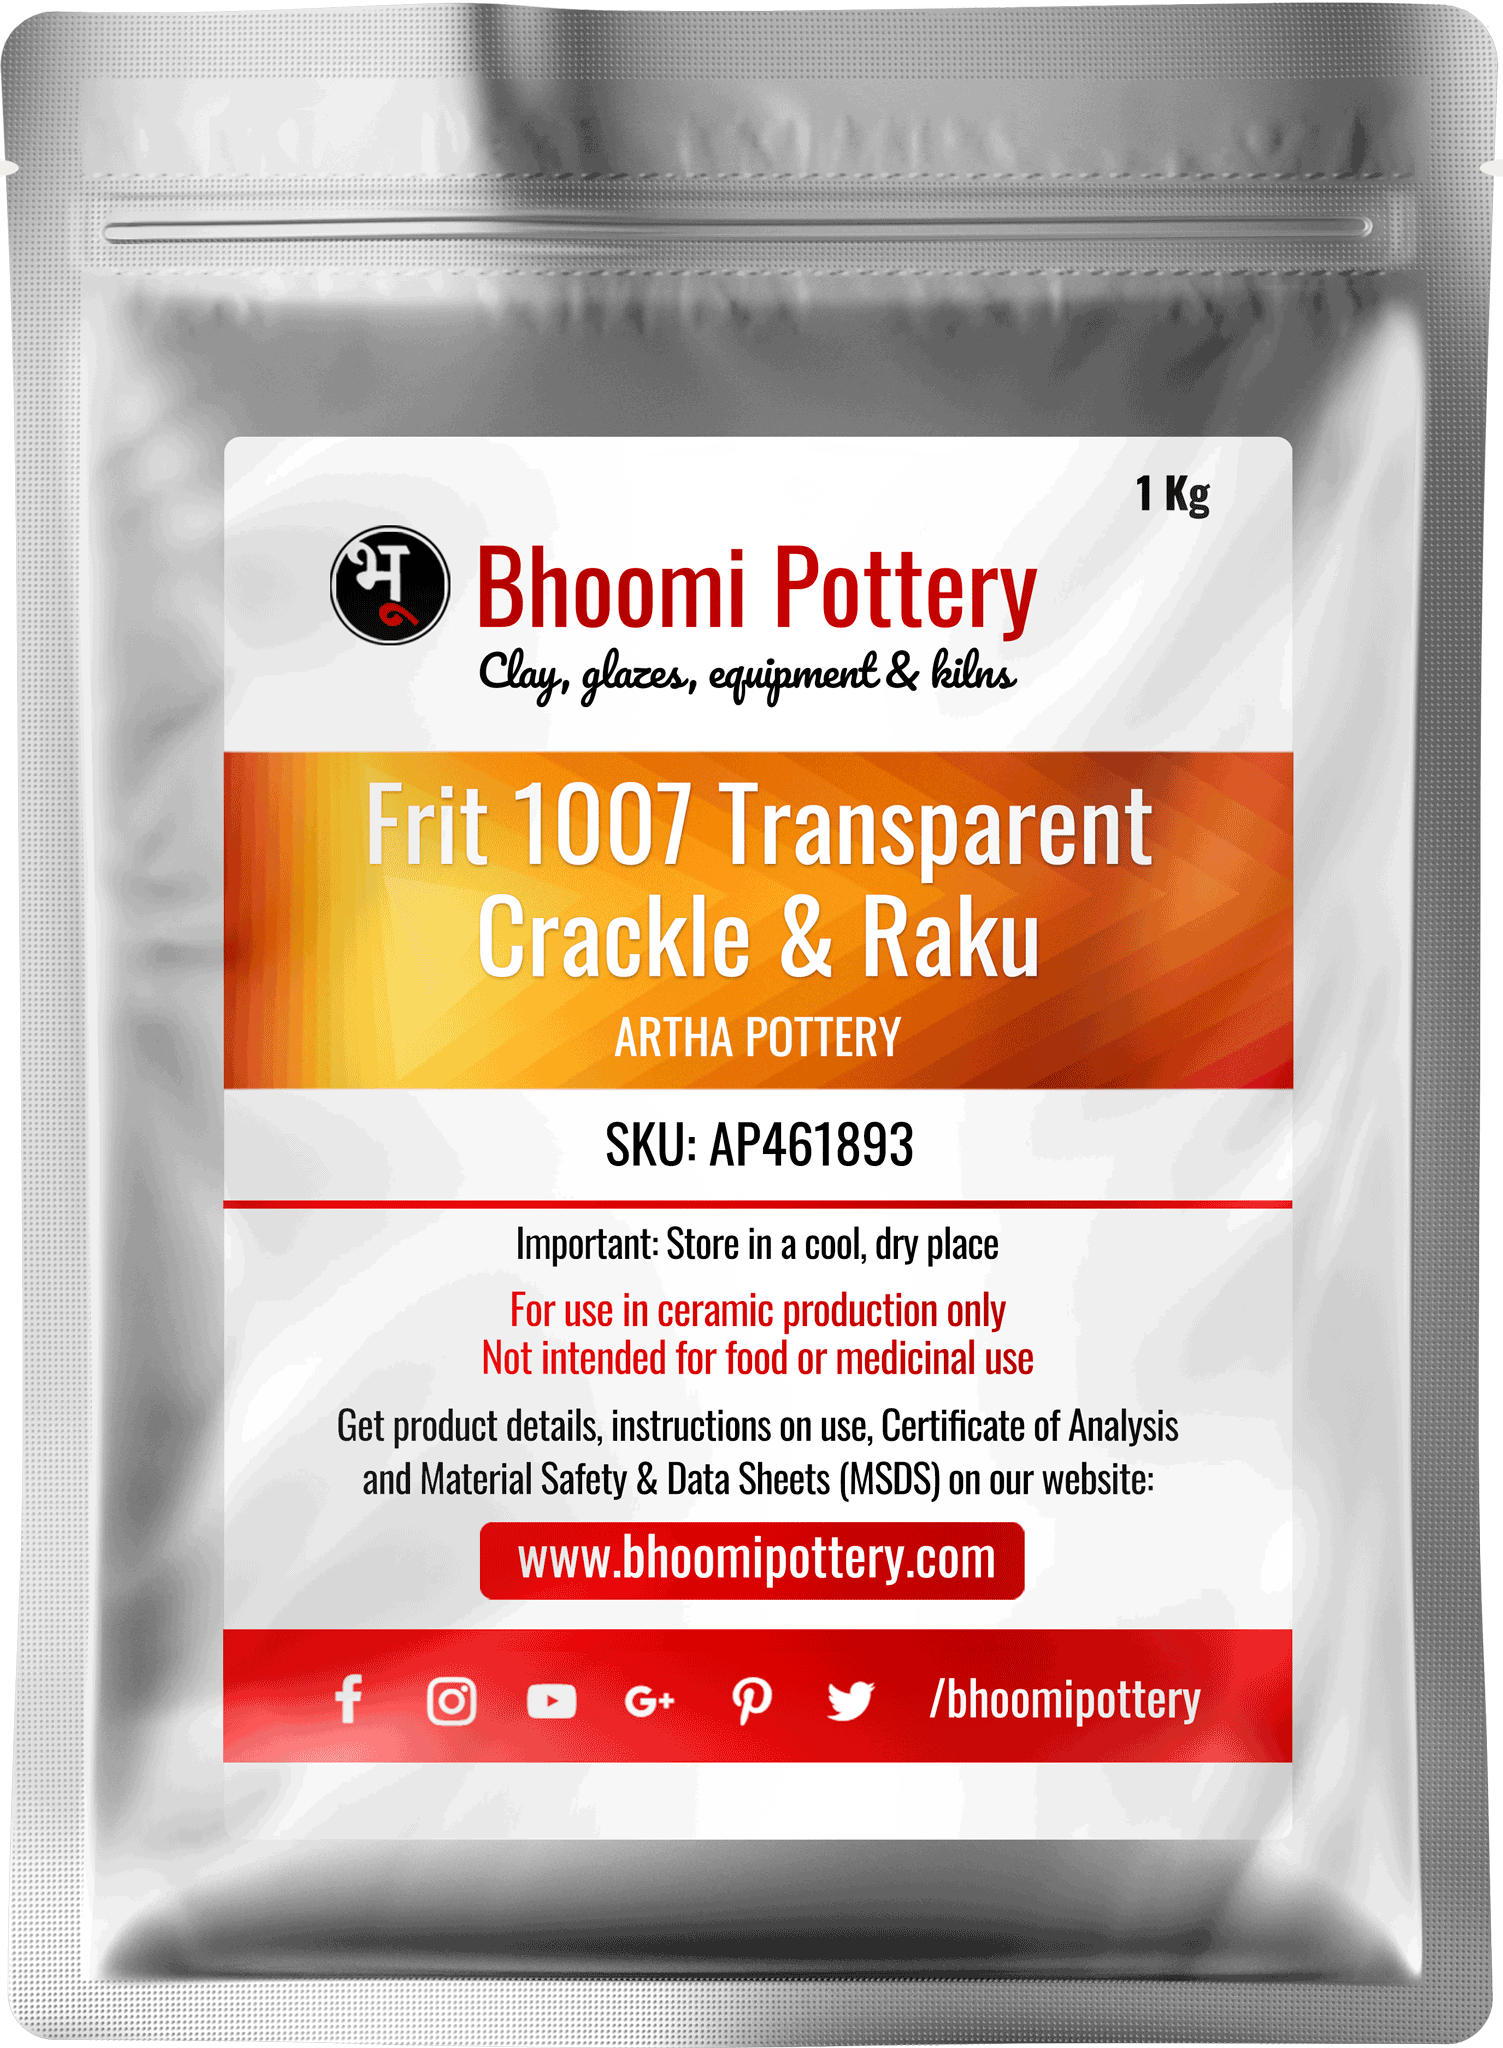 Artha Pottery Frit 1007 Fransparent Frit. Crackle and Raku for sale in India - Bhoomi Pottery